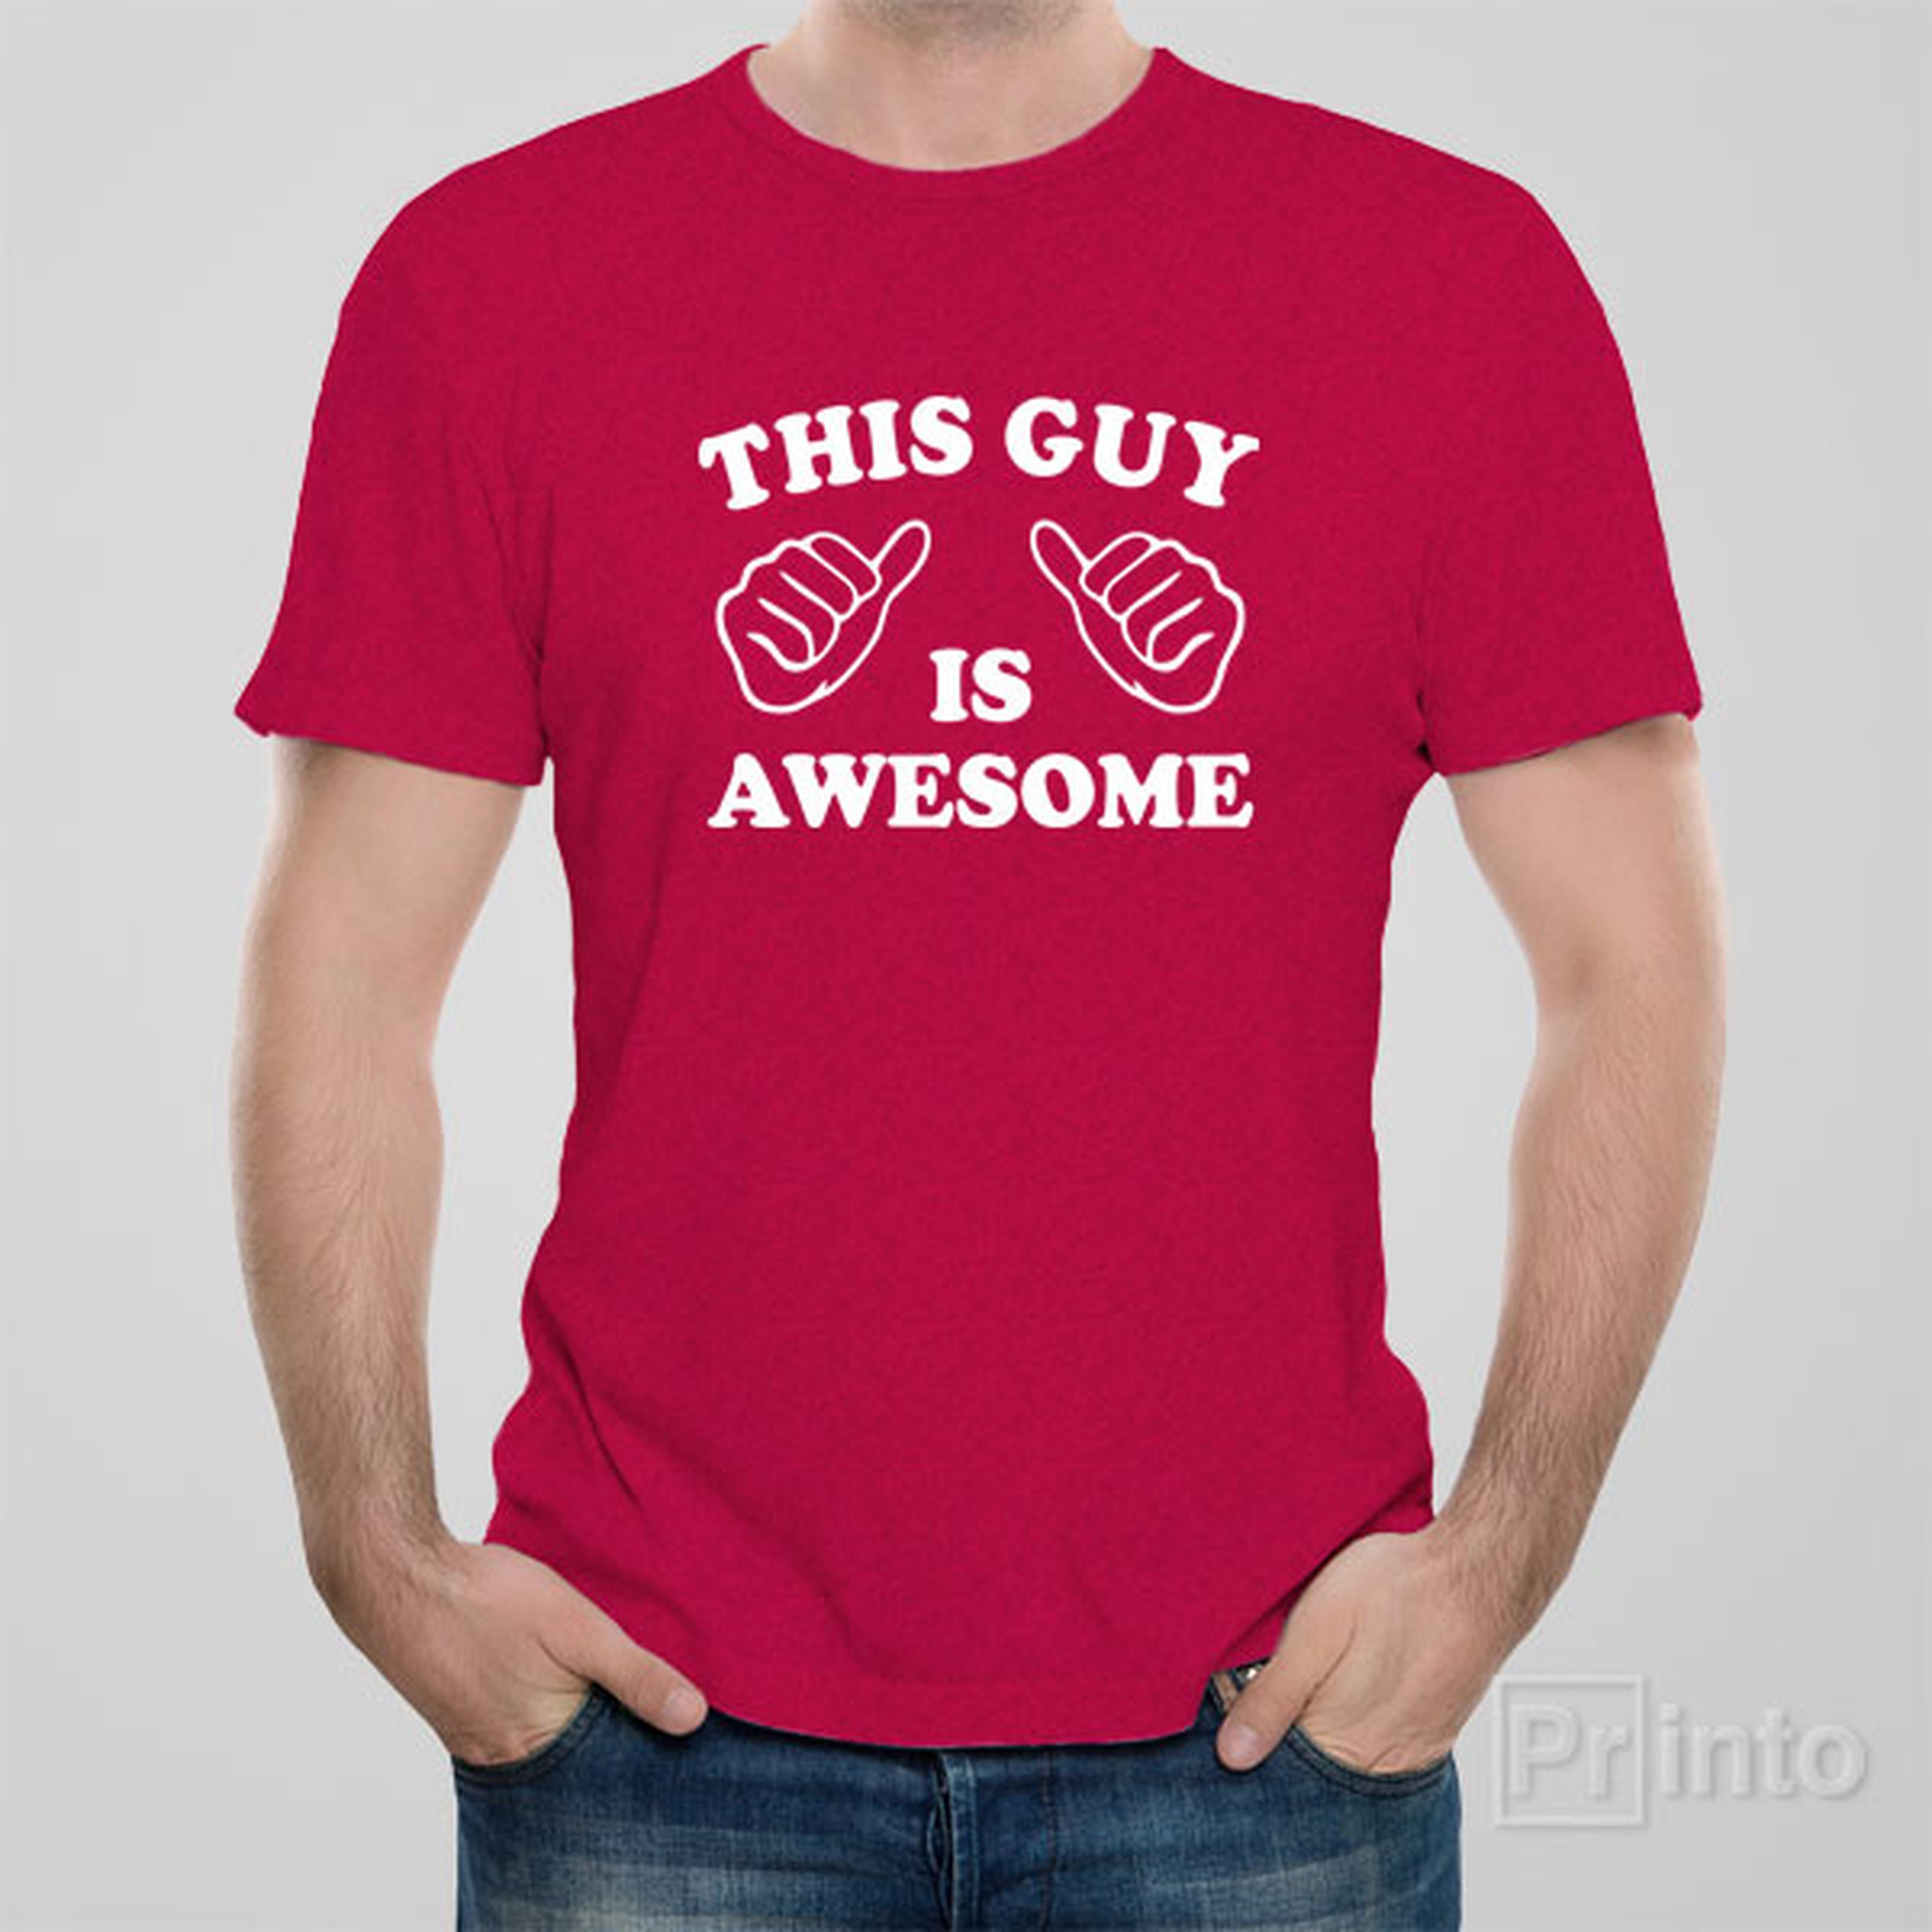 this-guy-is-awesome-t-shirt